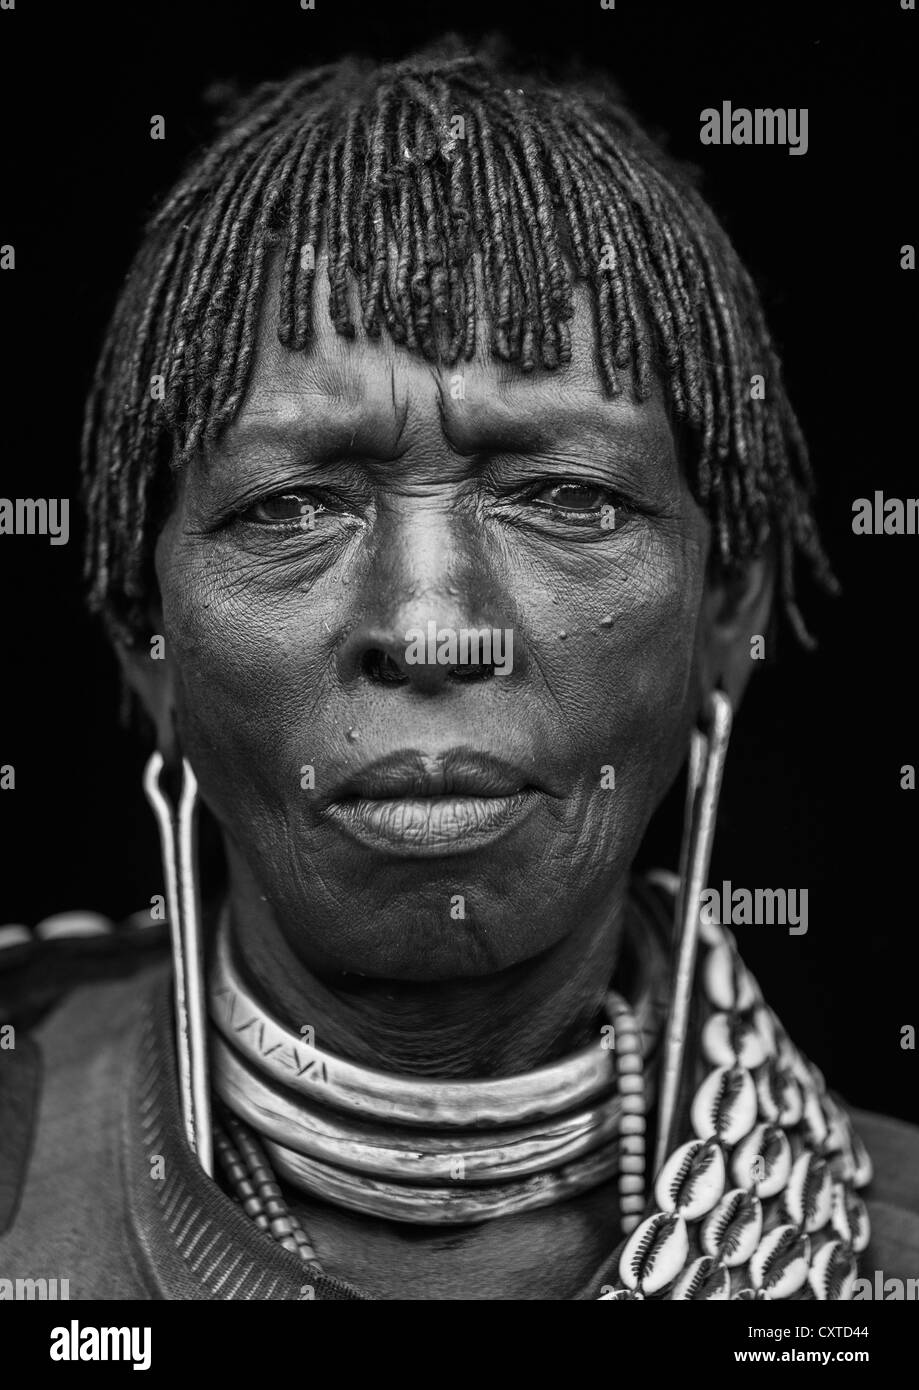 Bana Tribe Woman With Traditional Hairstyle And A Ncklace Made Of Shelves, Key Afer, Omo Valley, Ethiopia Stock Photo